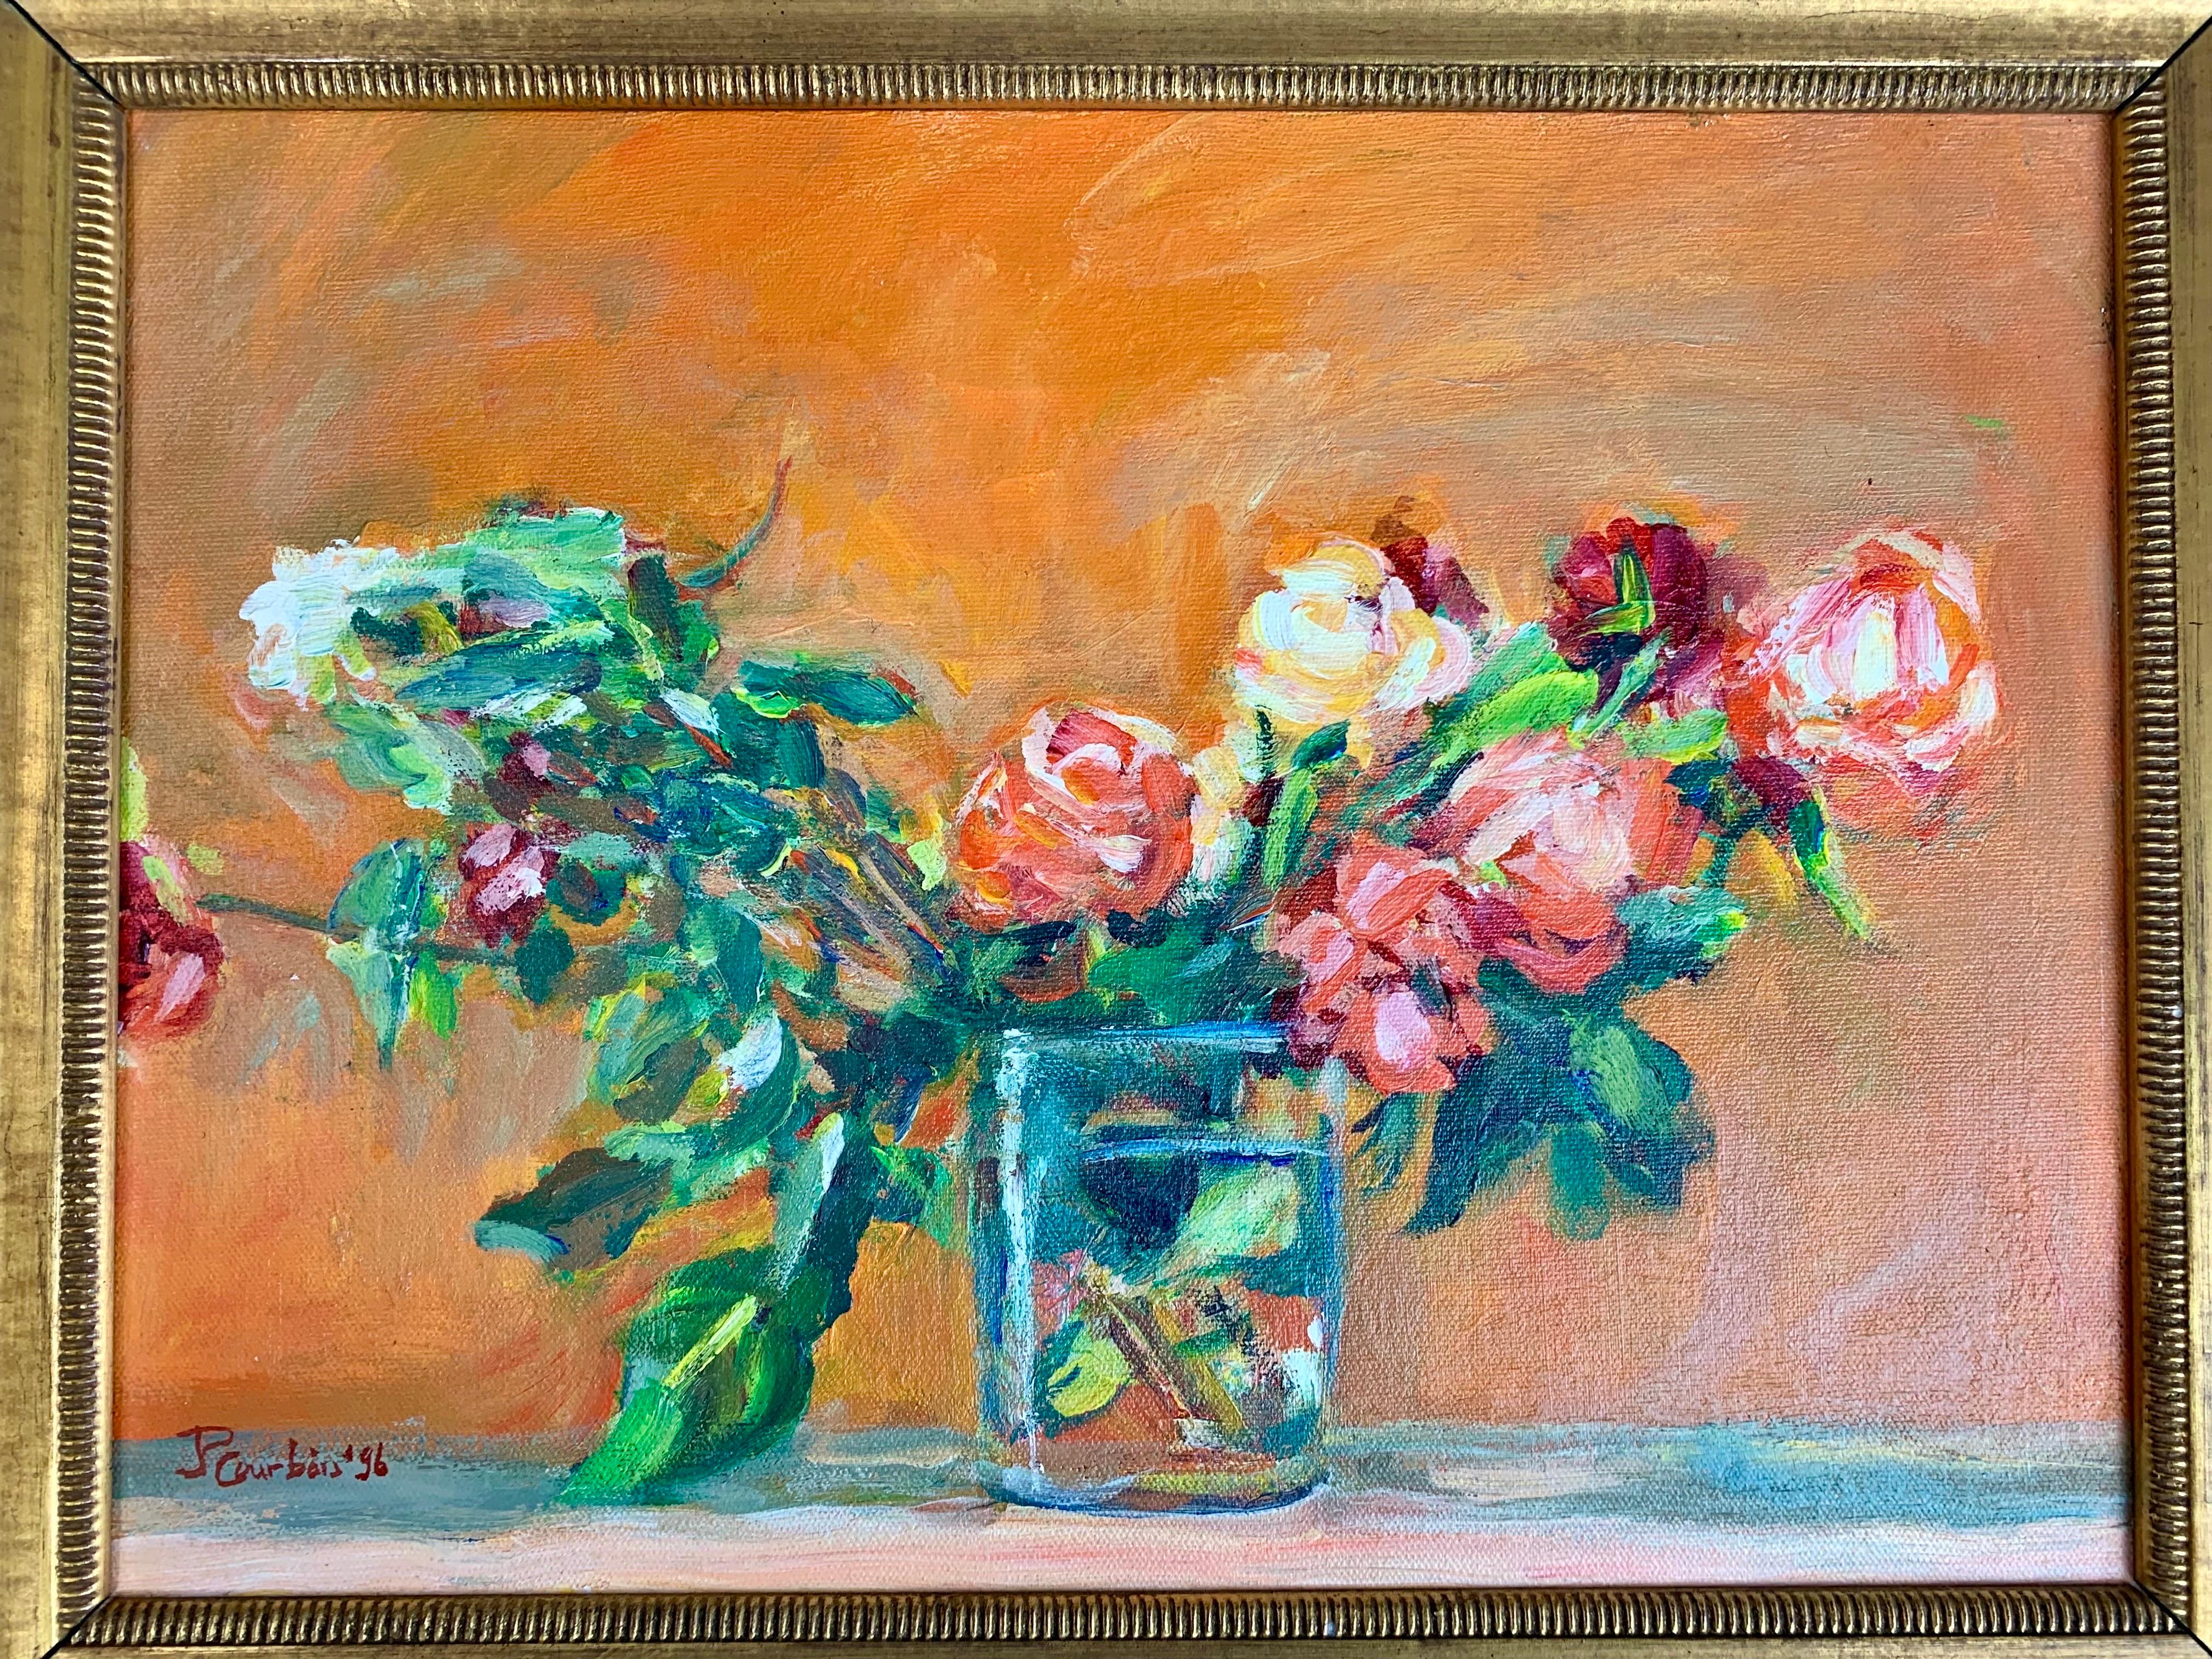 Original oil painting on canvas, professionally framed. Rich, vibrant color scheme showcased in a traditional custom golden frame. Artwork is in great vintage condition and arrives ready to hang.  Signed and dated P. Corbois 1996.  Origin: